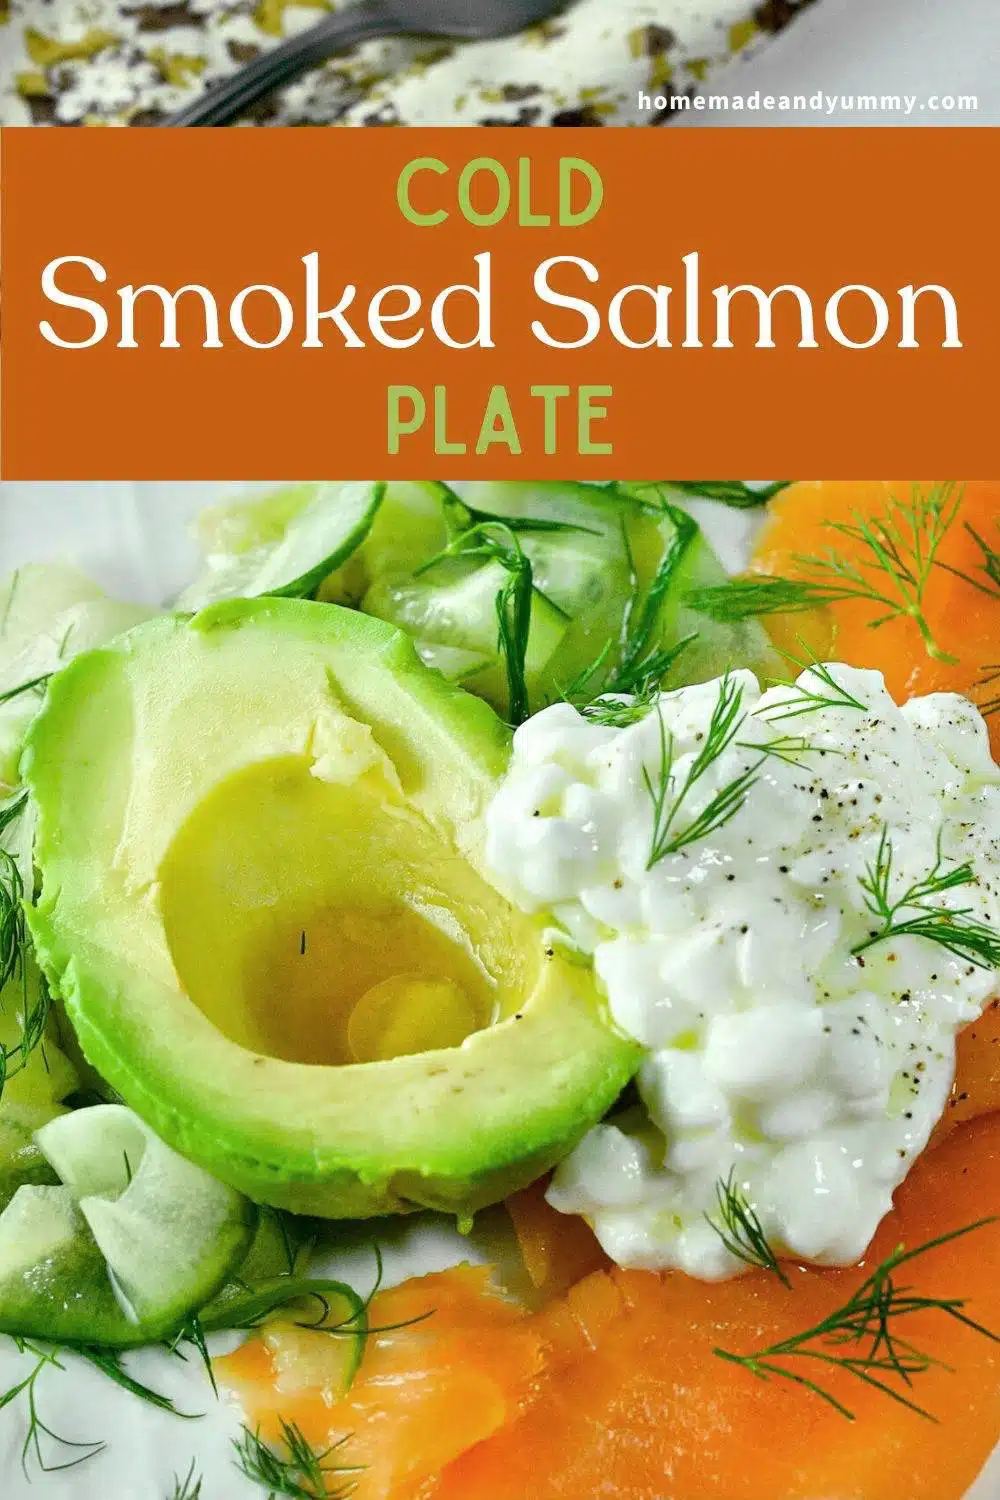 Smoked Salmon Cold Plate dinner idea.